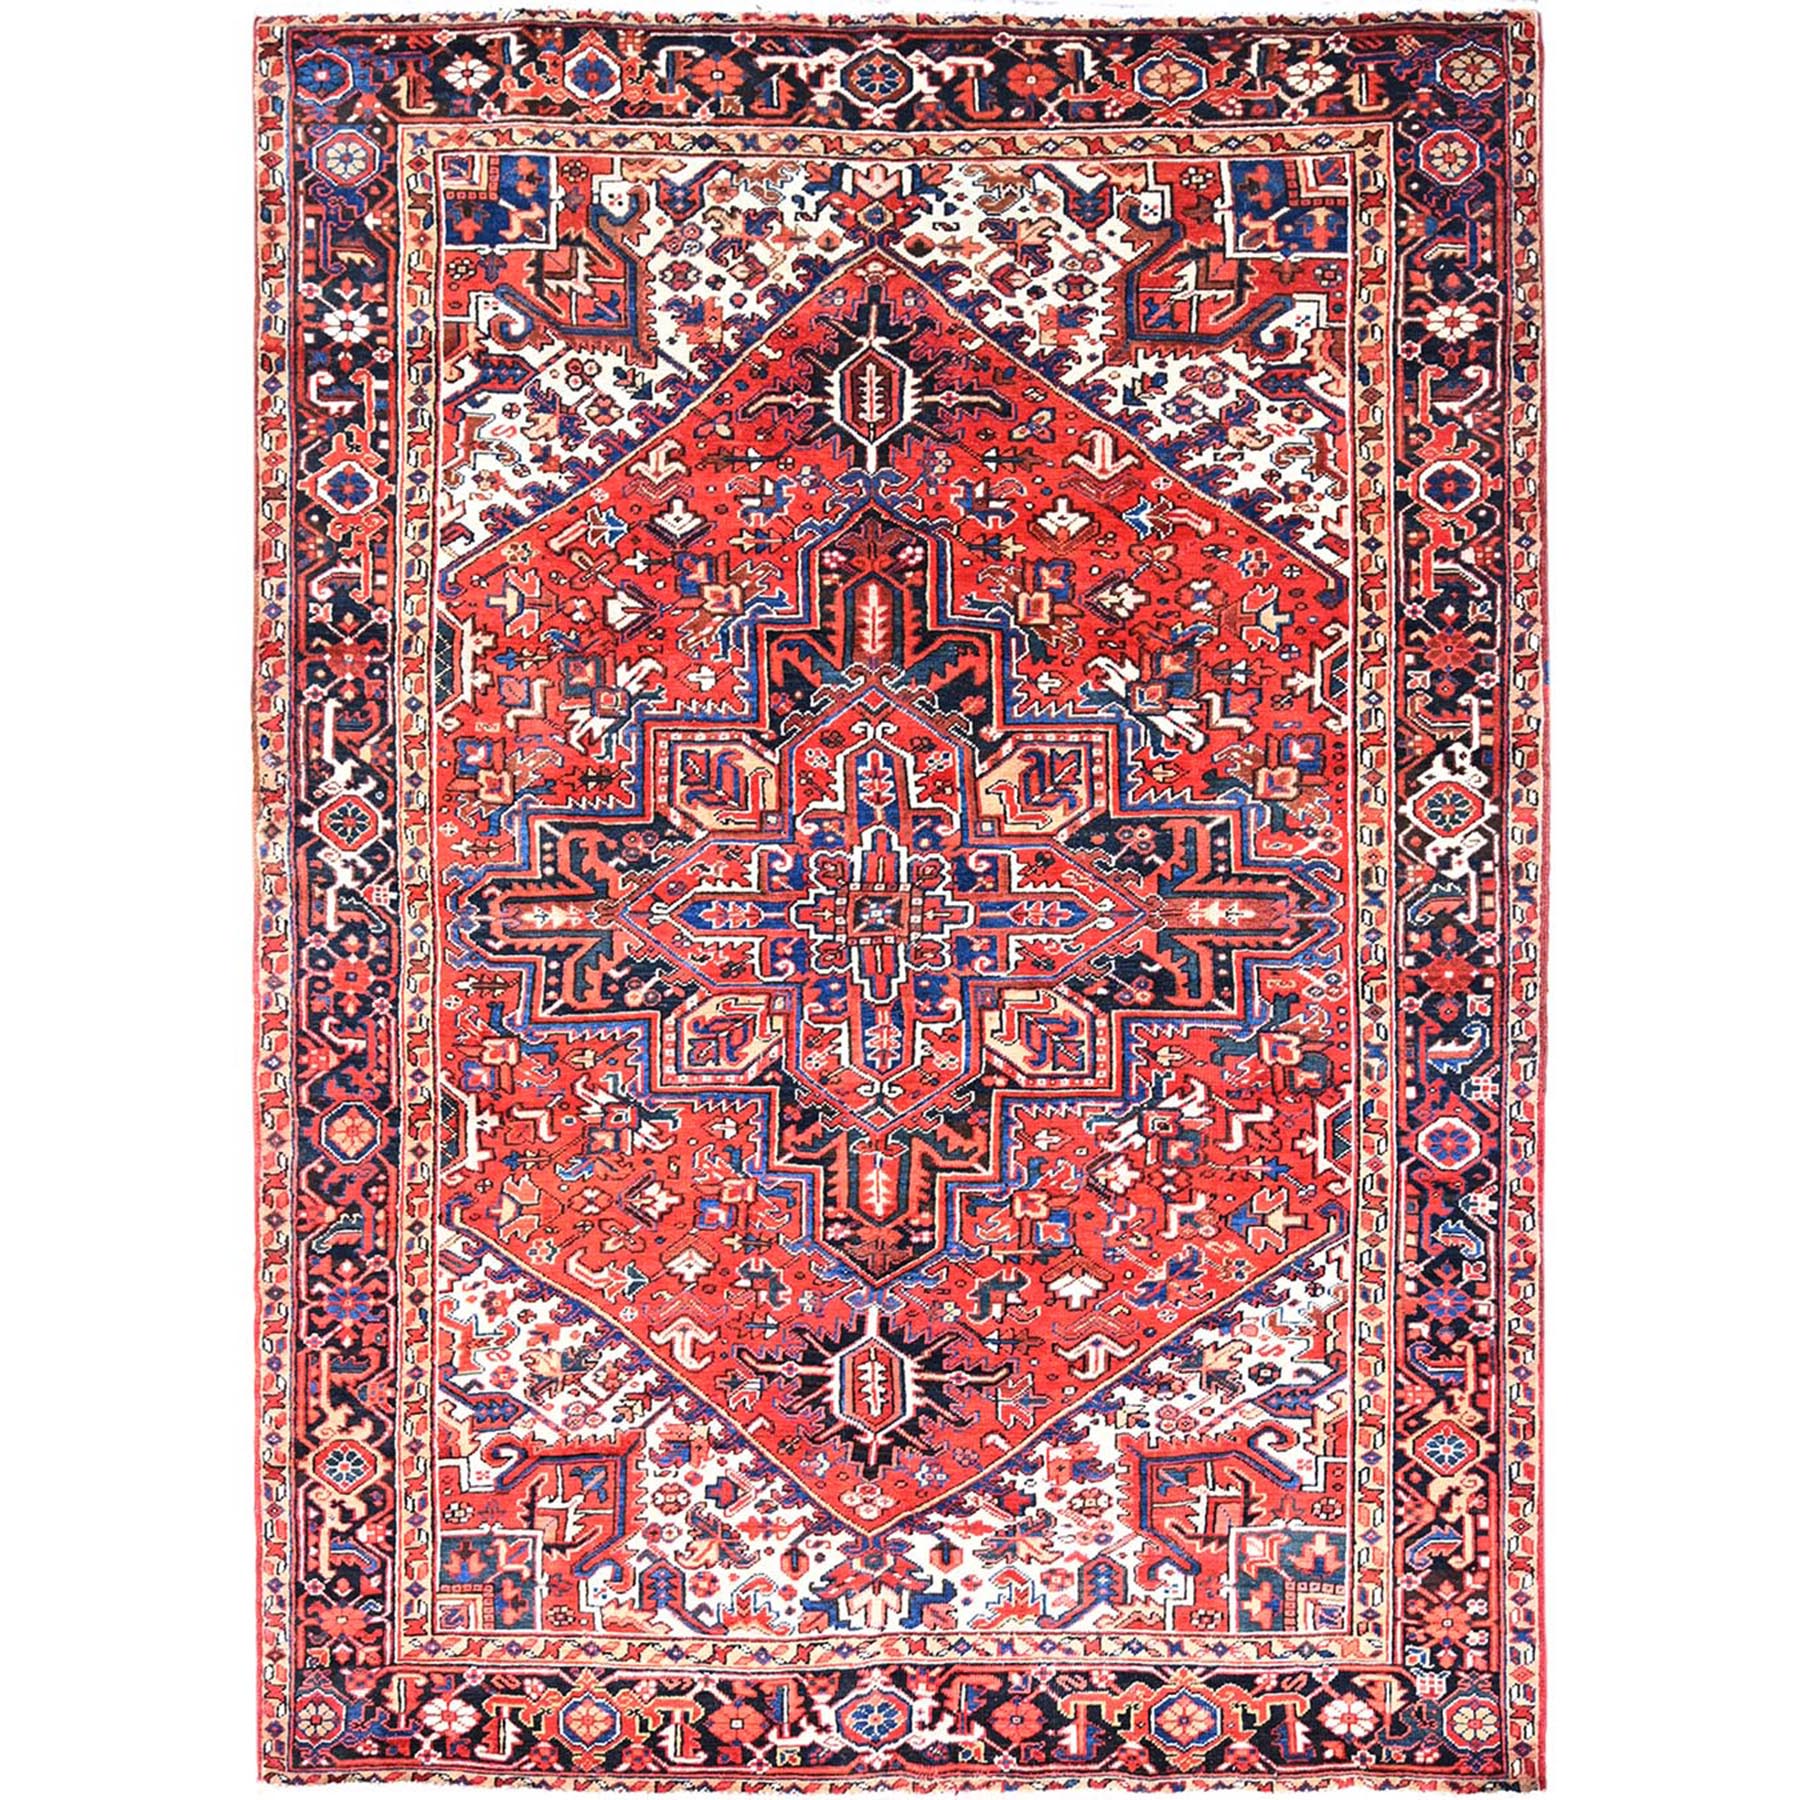  Wool Hand-Knotted Area Rug 6'11